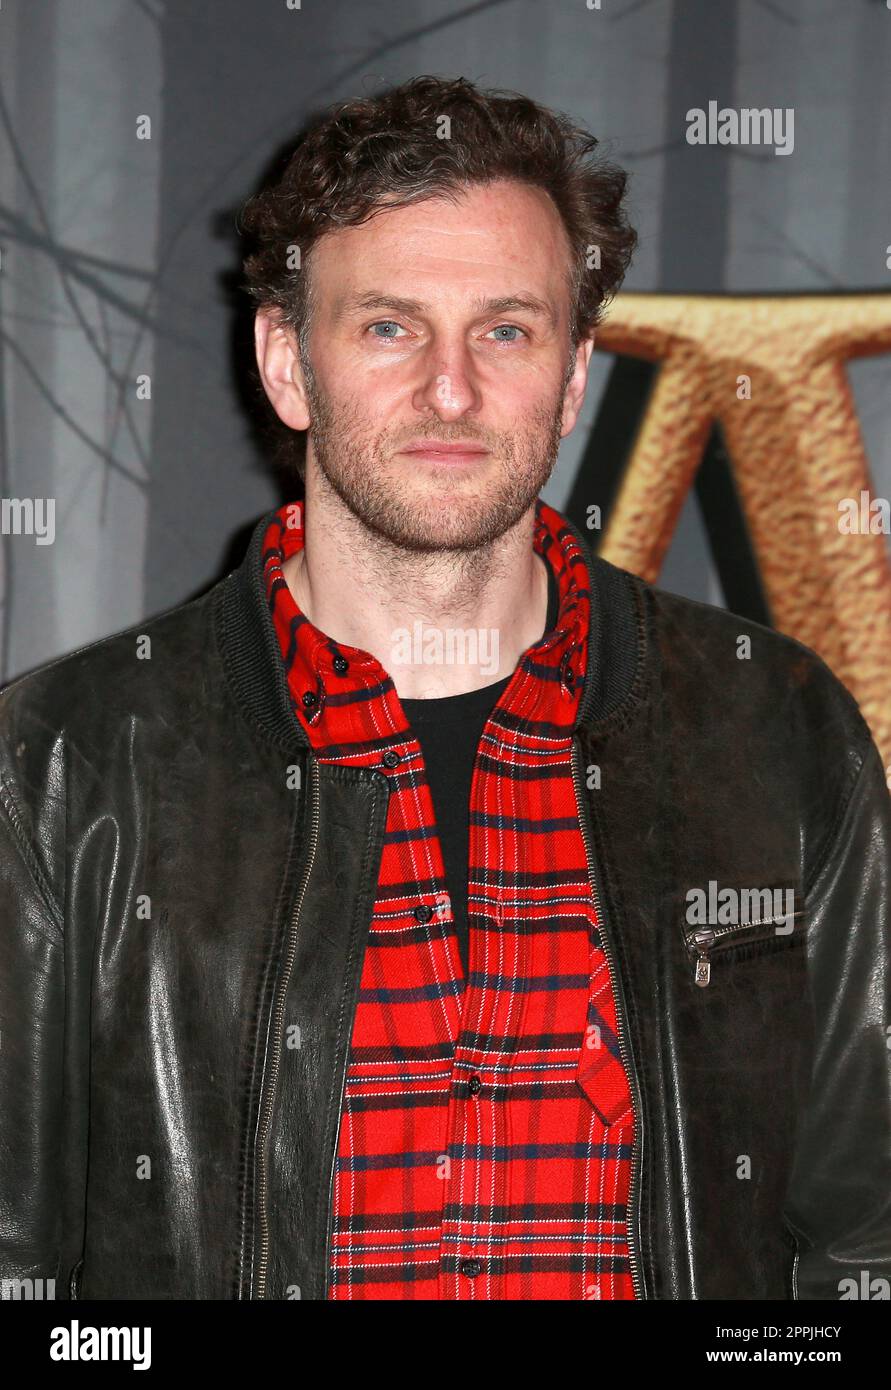 London, UK. 24th Feb, 2022. Steven Cree attends the 'Outlander' Season 6 premiere at The Royal Festival Hall in London. (Photo by Fred Duval/SOPA Images/Sipa USA) Credit: Sipa USA/Alamy Live News Stock Photo